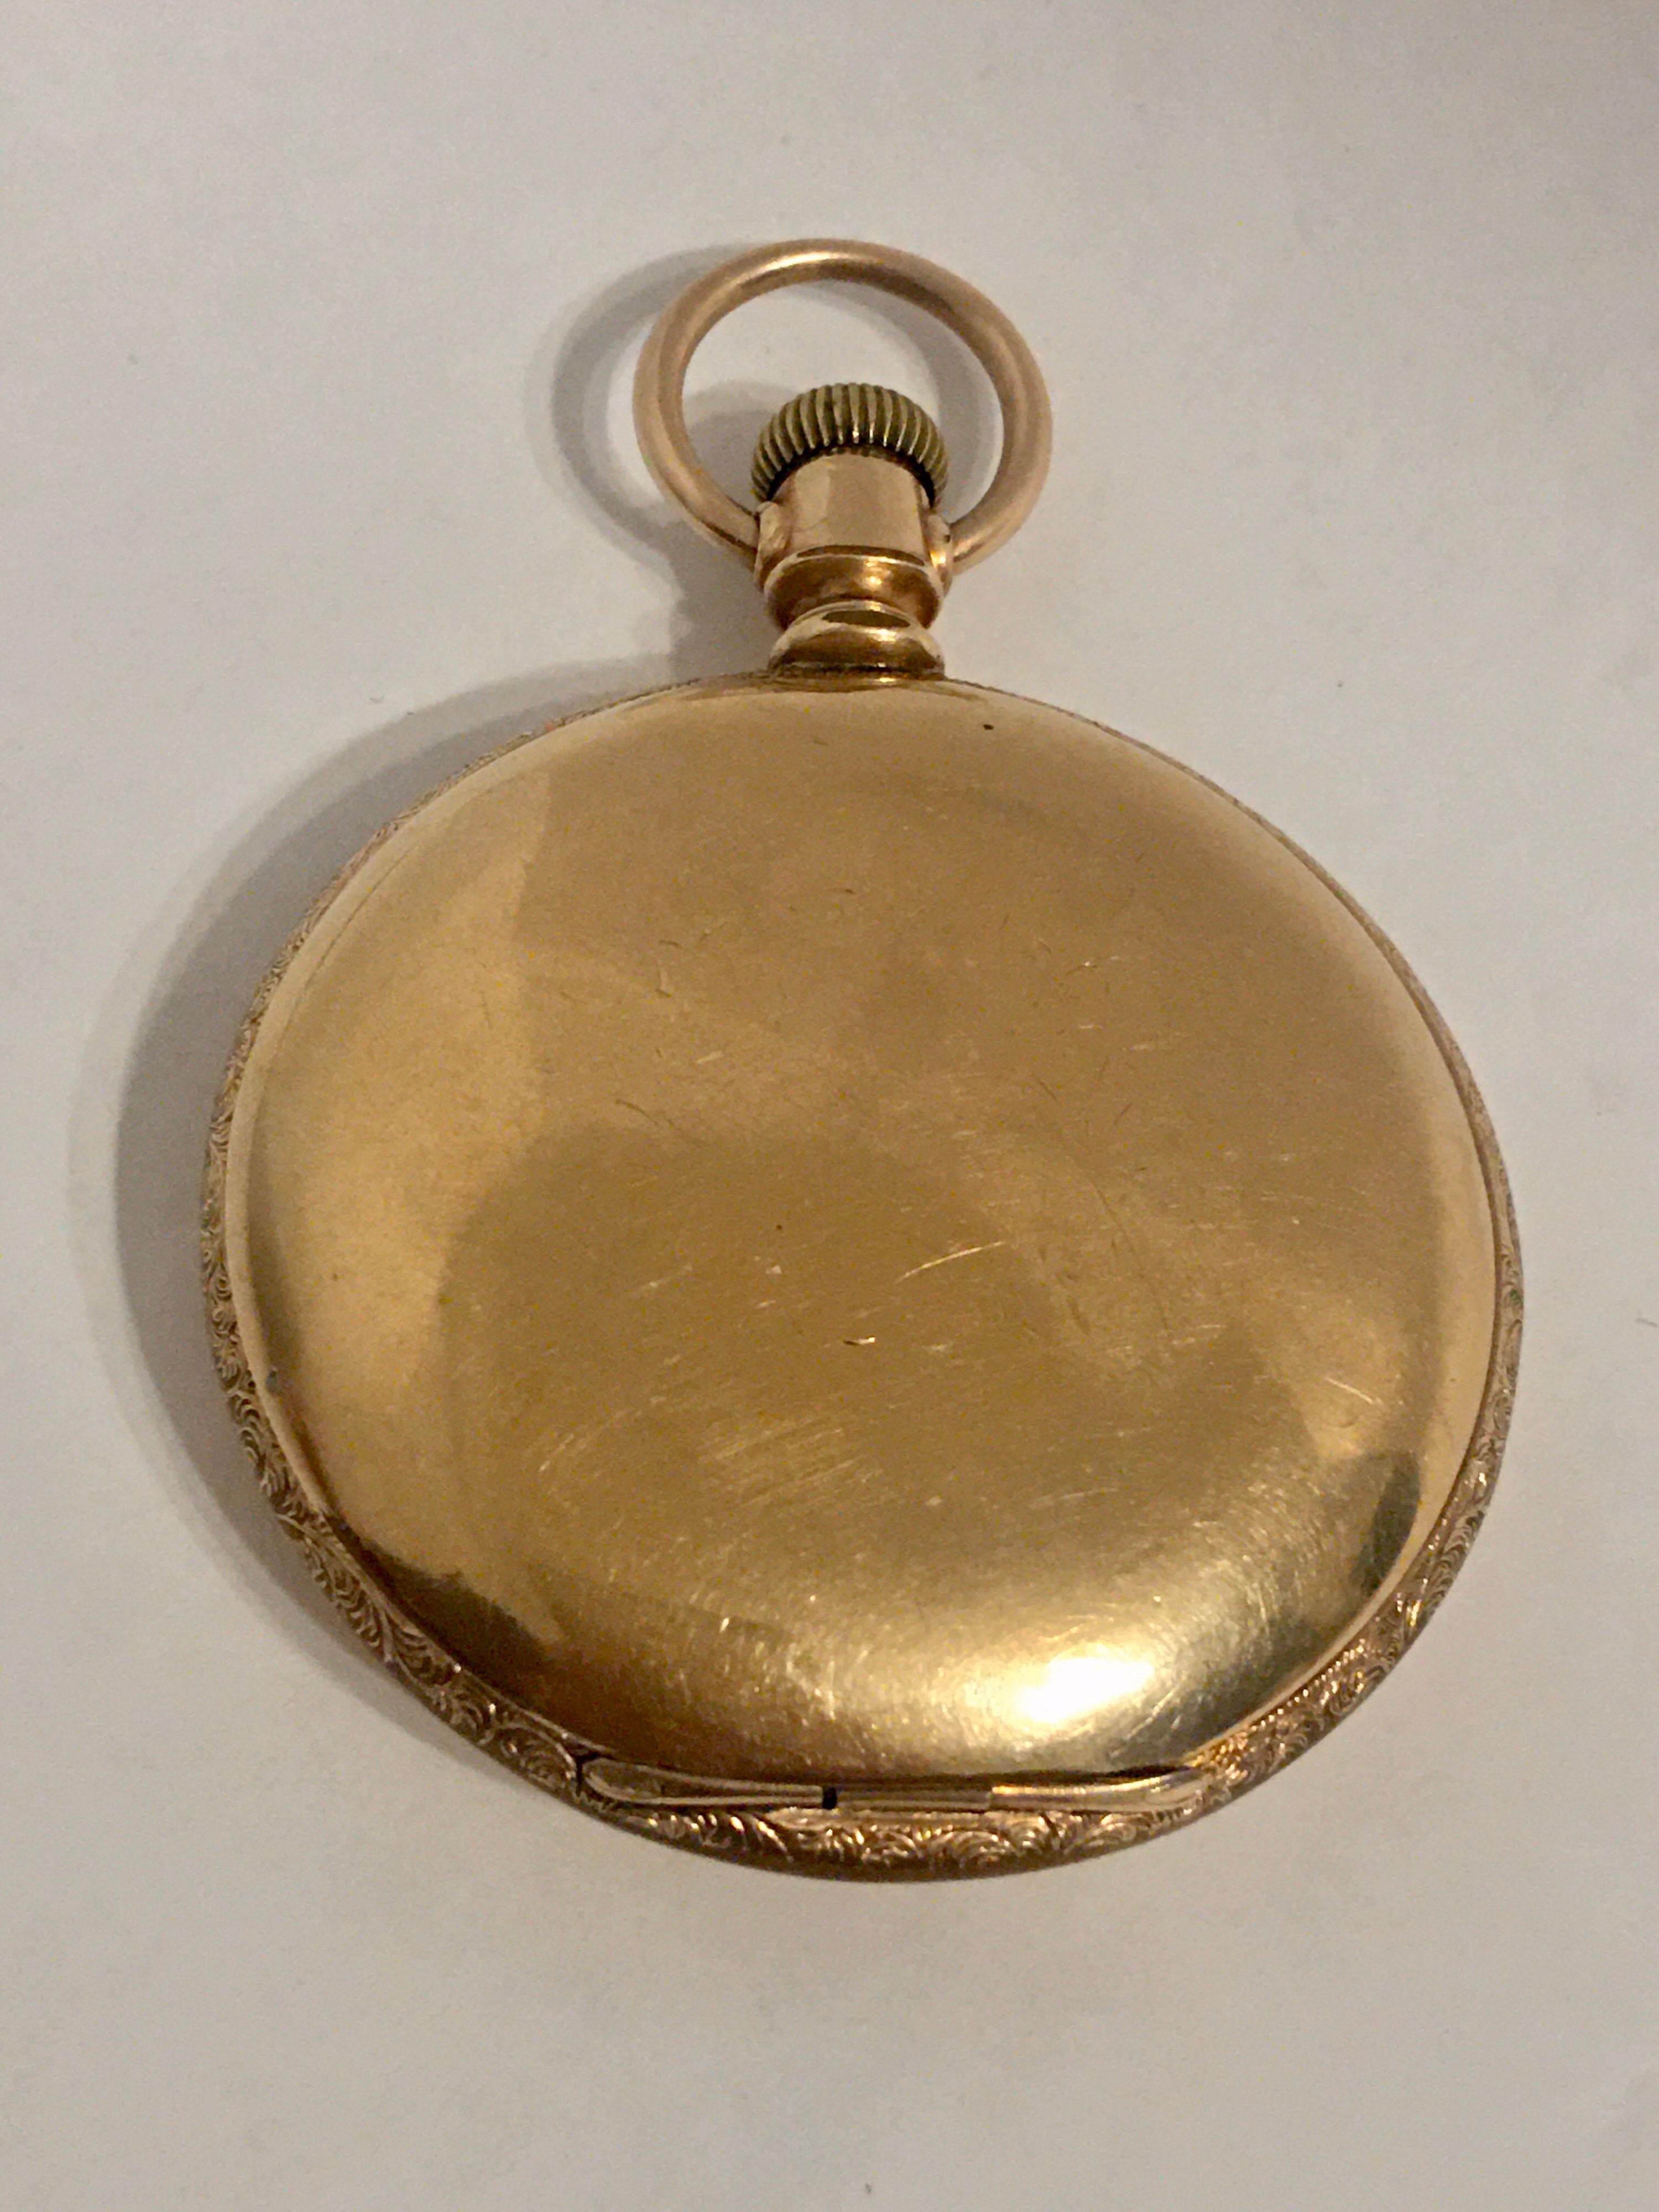 14K Gold-Filled Full Hunter American Waltham Watch Co. Antique Gentleman’s Pocket Watch

This Charming Pre-own Full Hunter Pocket Watch is working and it is ticking well. Visible dents on the back cover case and a metal tested mark as shown.